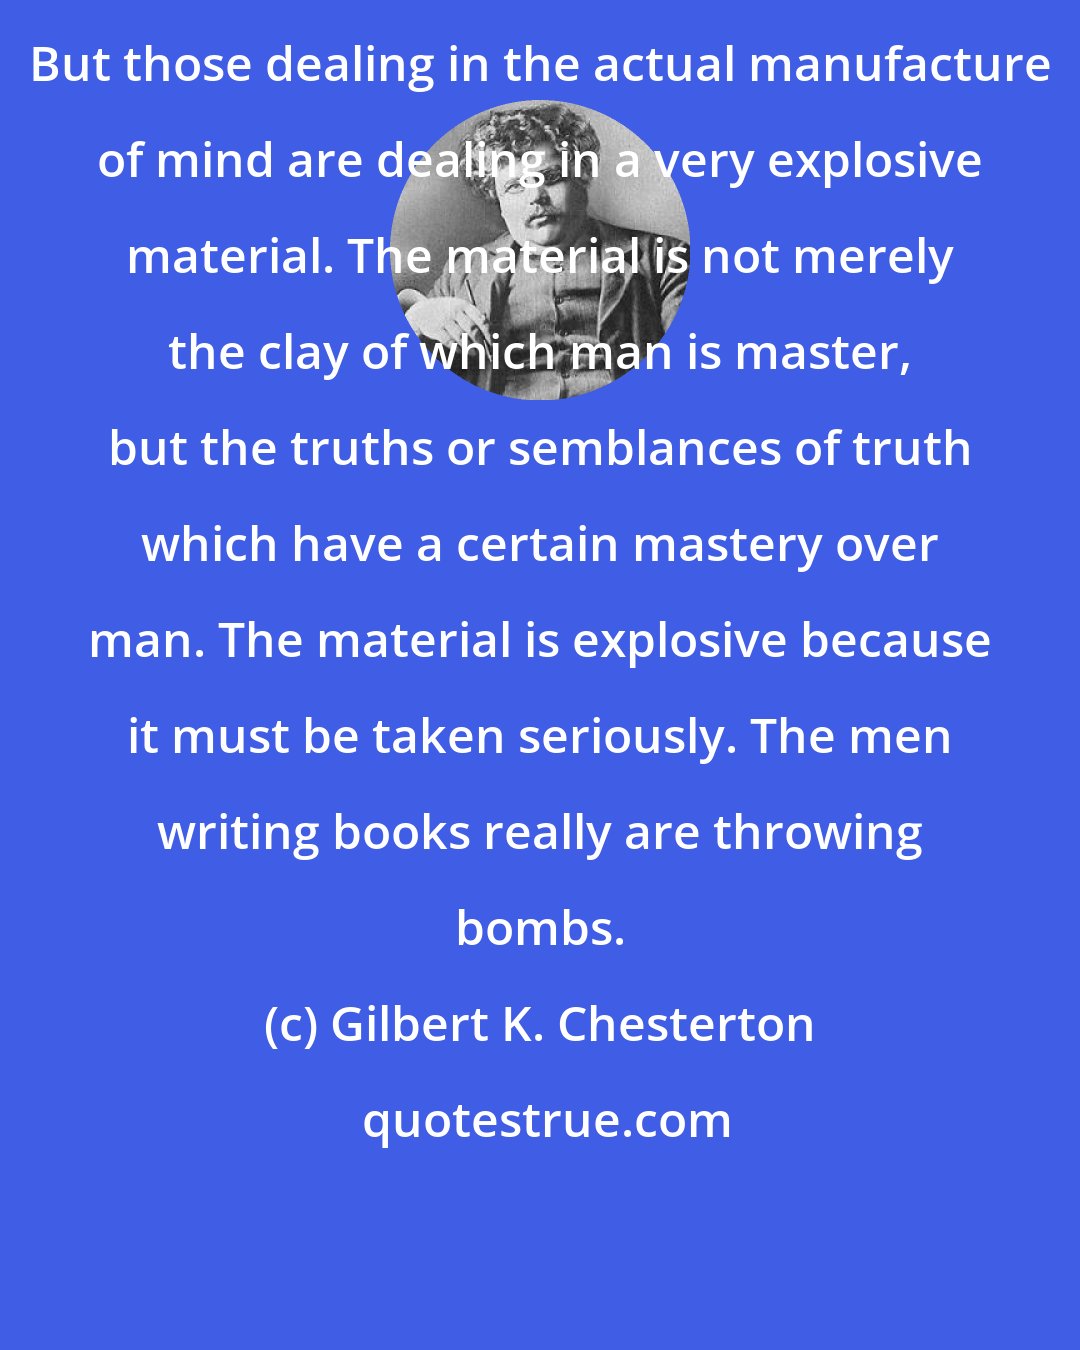 Gilbert K. Chesterton: But those dealing in the actual manufacture of mind are dealing in a very explosive material. The material is not merely the clay of which man is master, but the truths or semblances of truth which have a certain mastery over man. The material is explosive because it must be taken seriously. The men writing books really are throwing bombs.